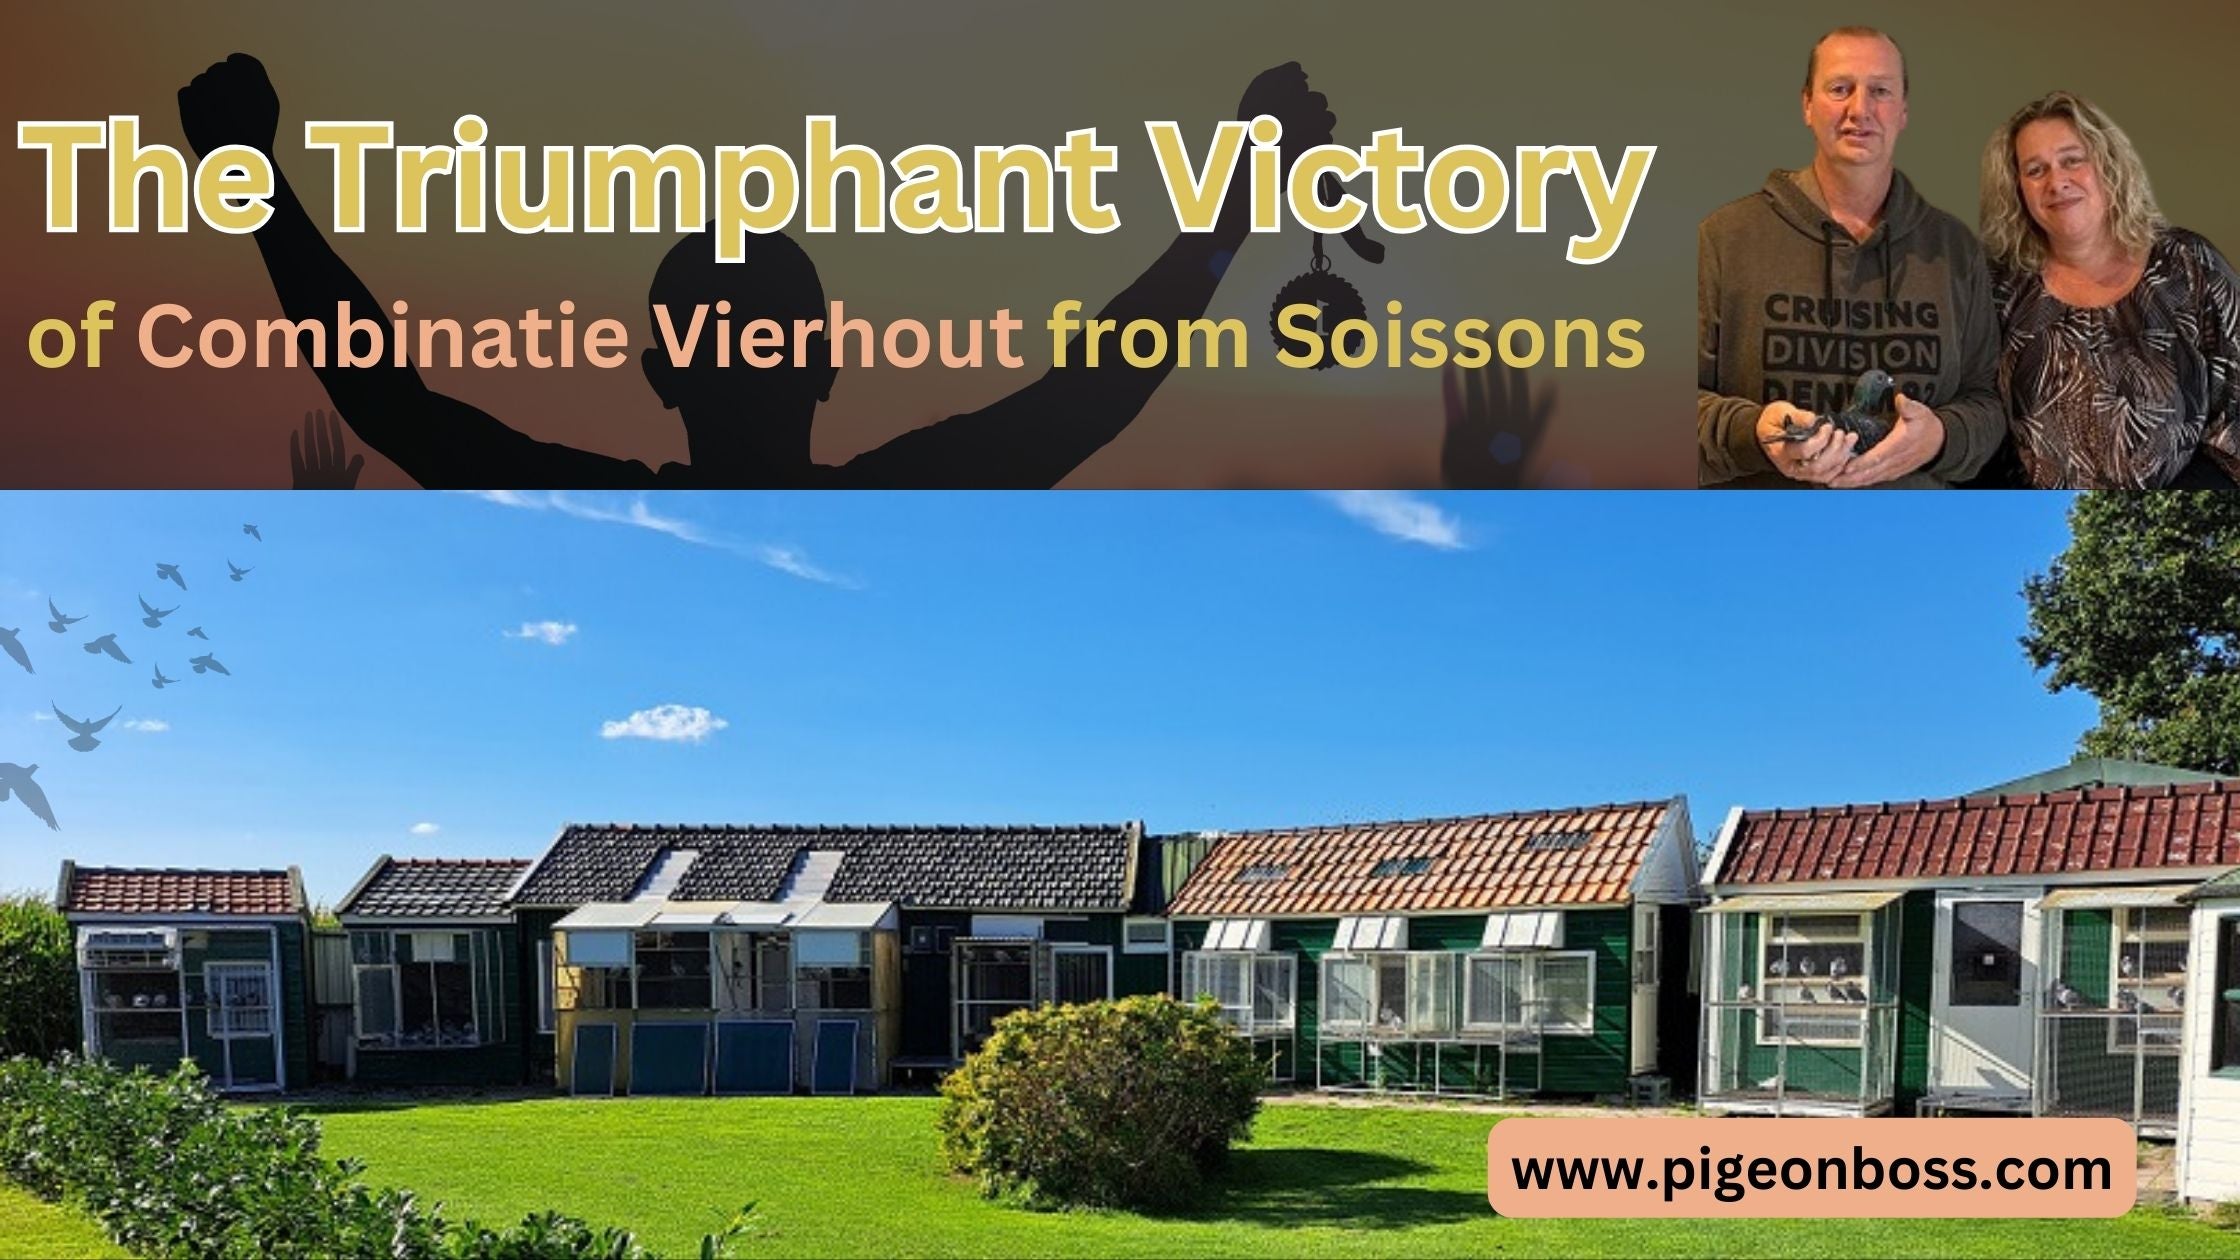 The Triumphant Victory of Combinatie Vierhout from Soissons